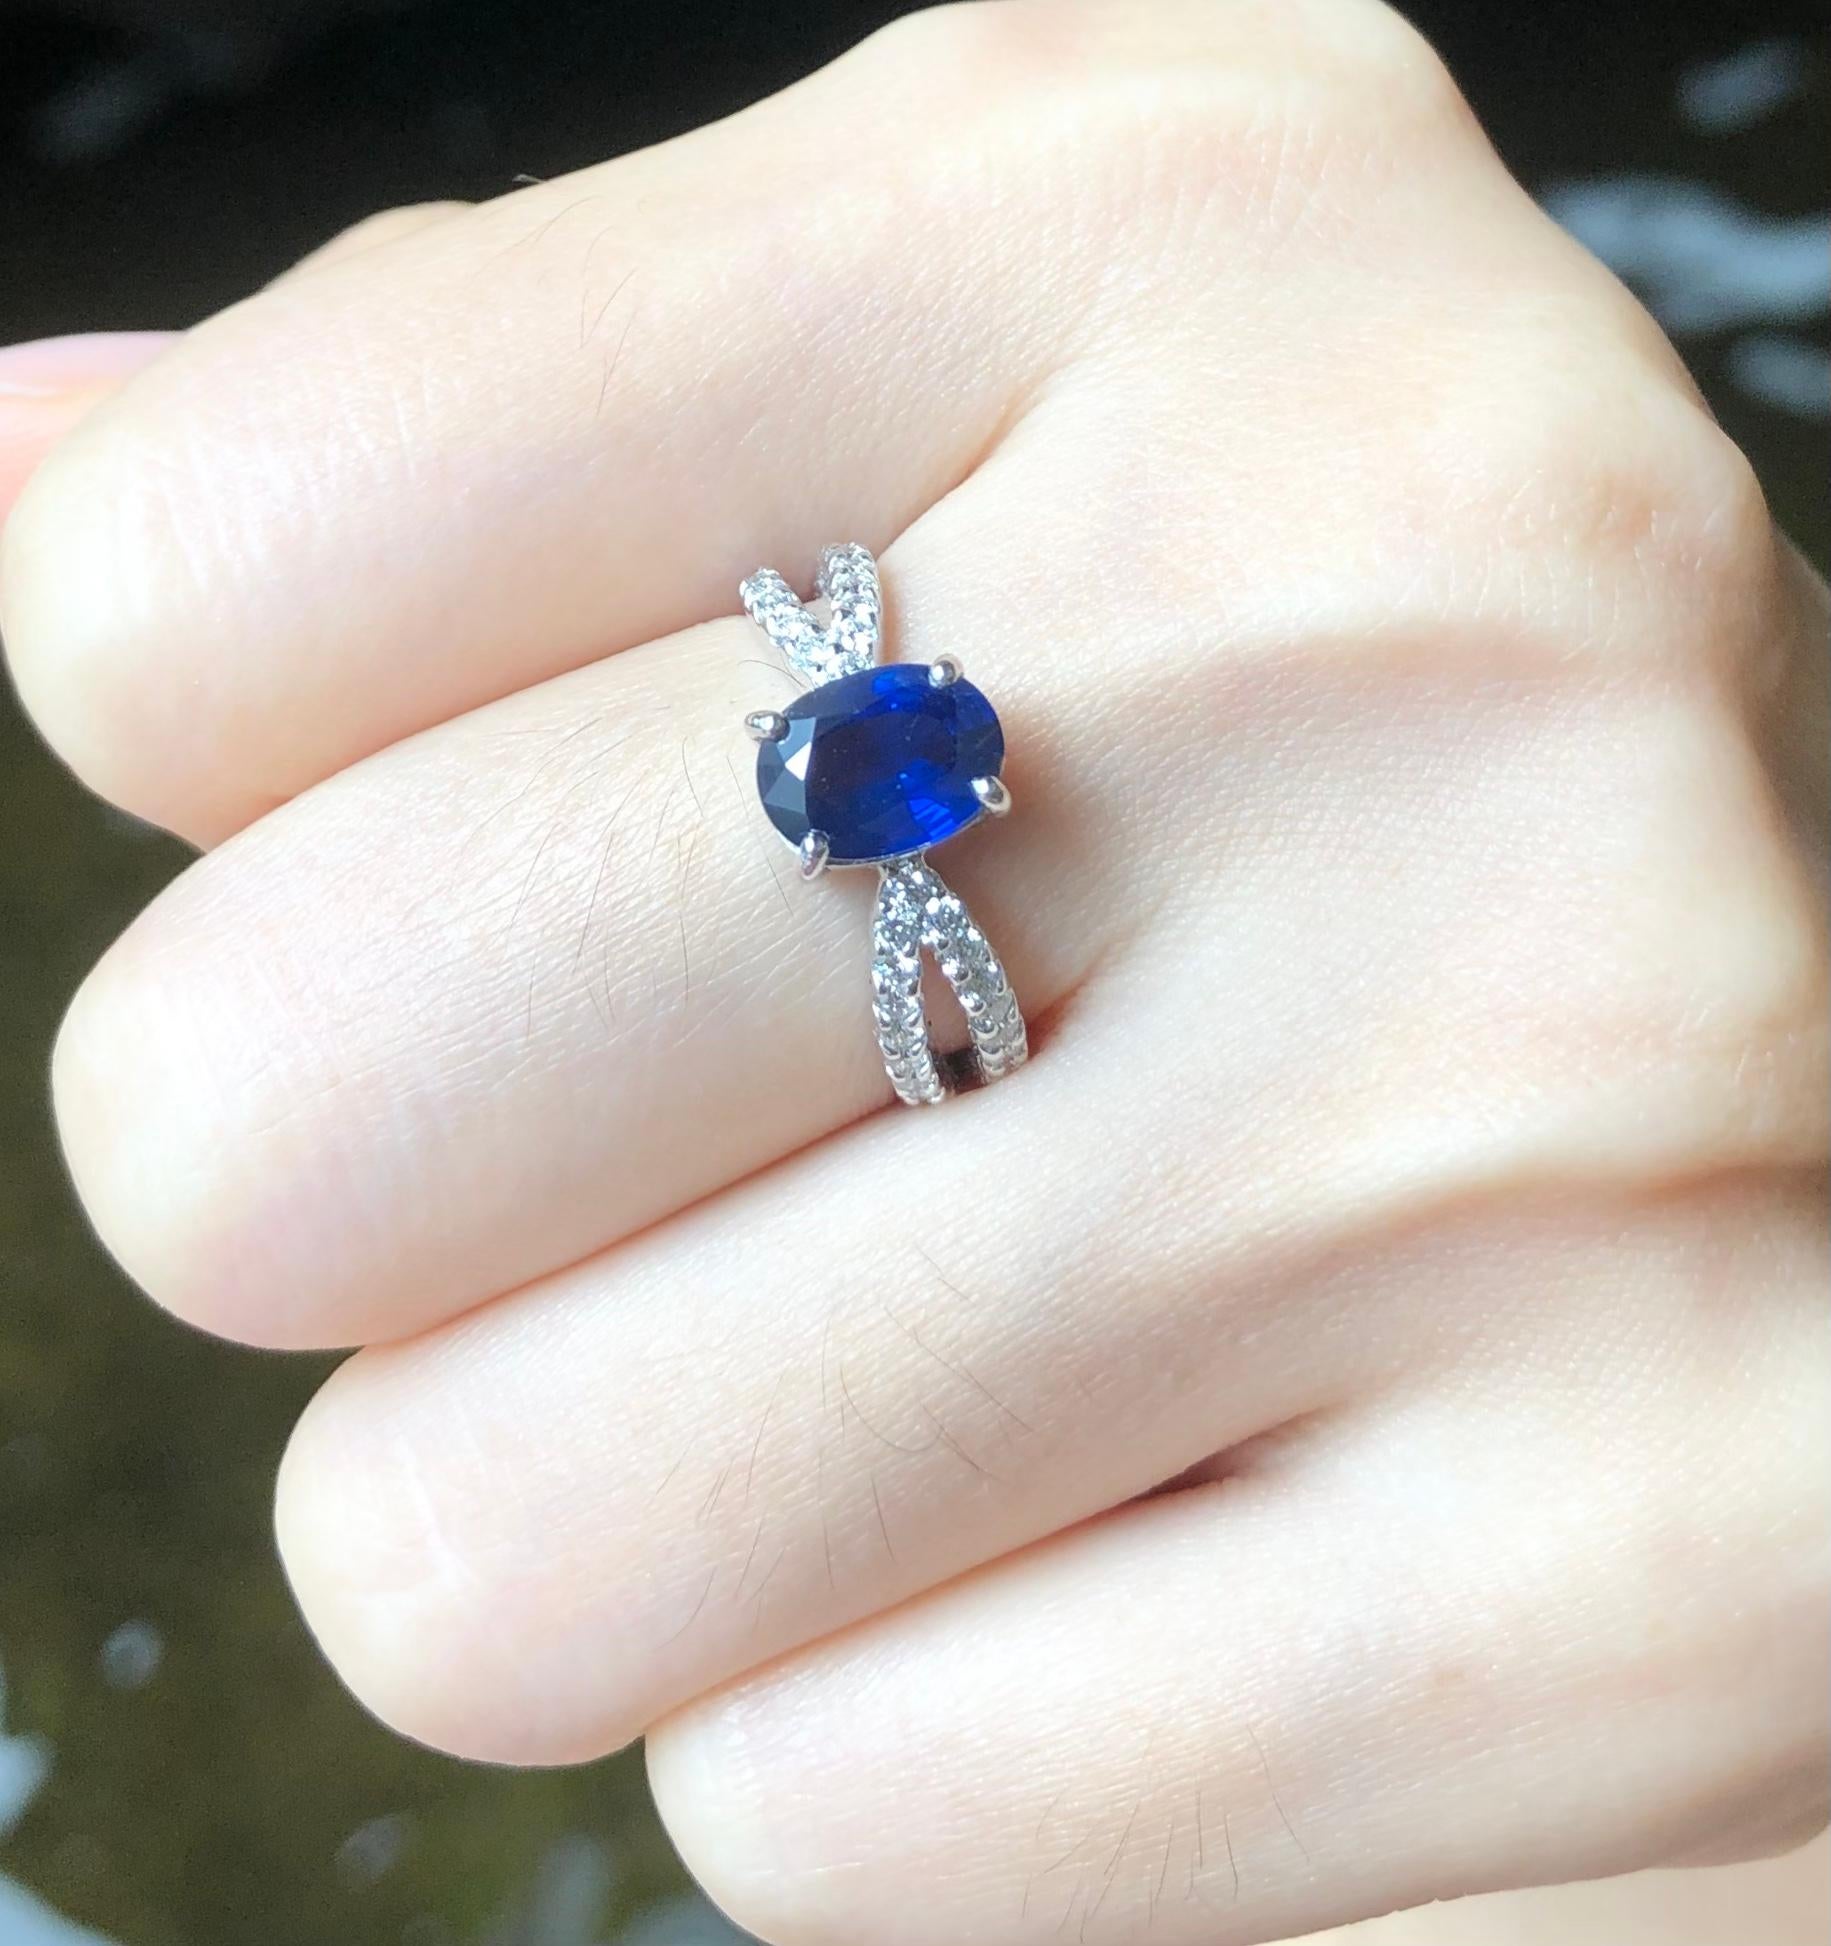 Blue Sapphire 1.60 carats with Diamond 0.52 carat Ring set in 18 Karat White Gold Settings

Width:  0.5 cm 
Length: 0.7 cm
Ring Size: 52
Total Weight: 4.81 grams

